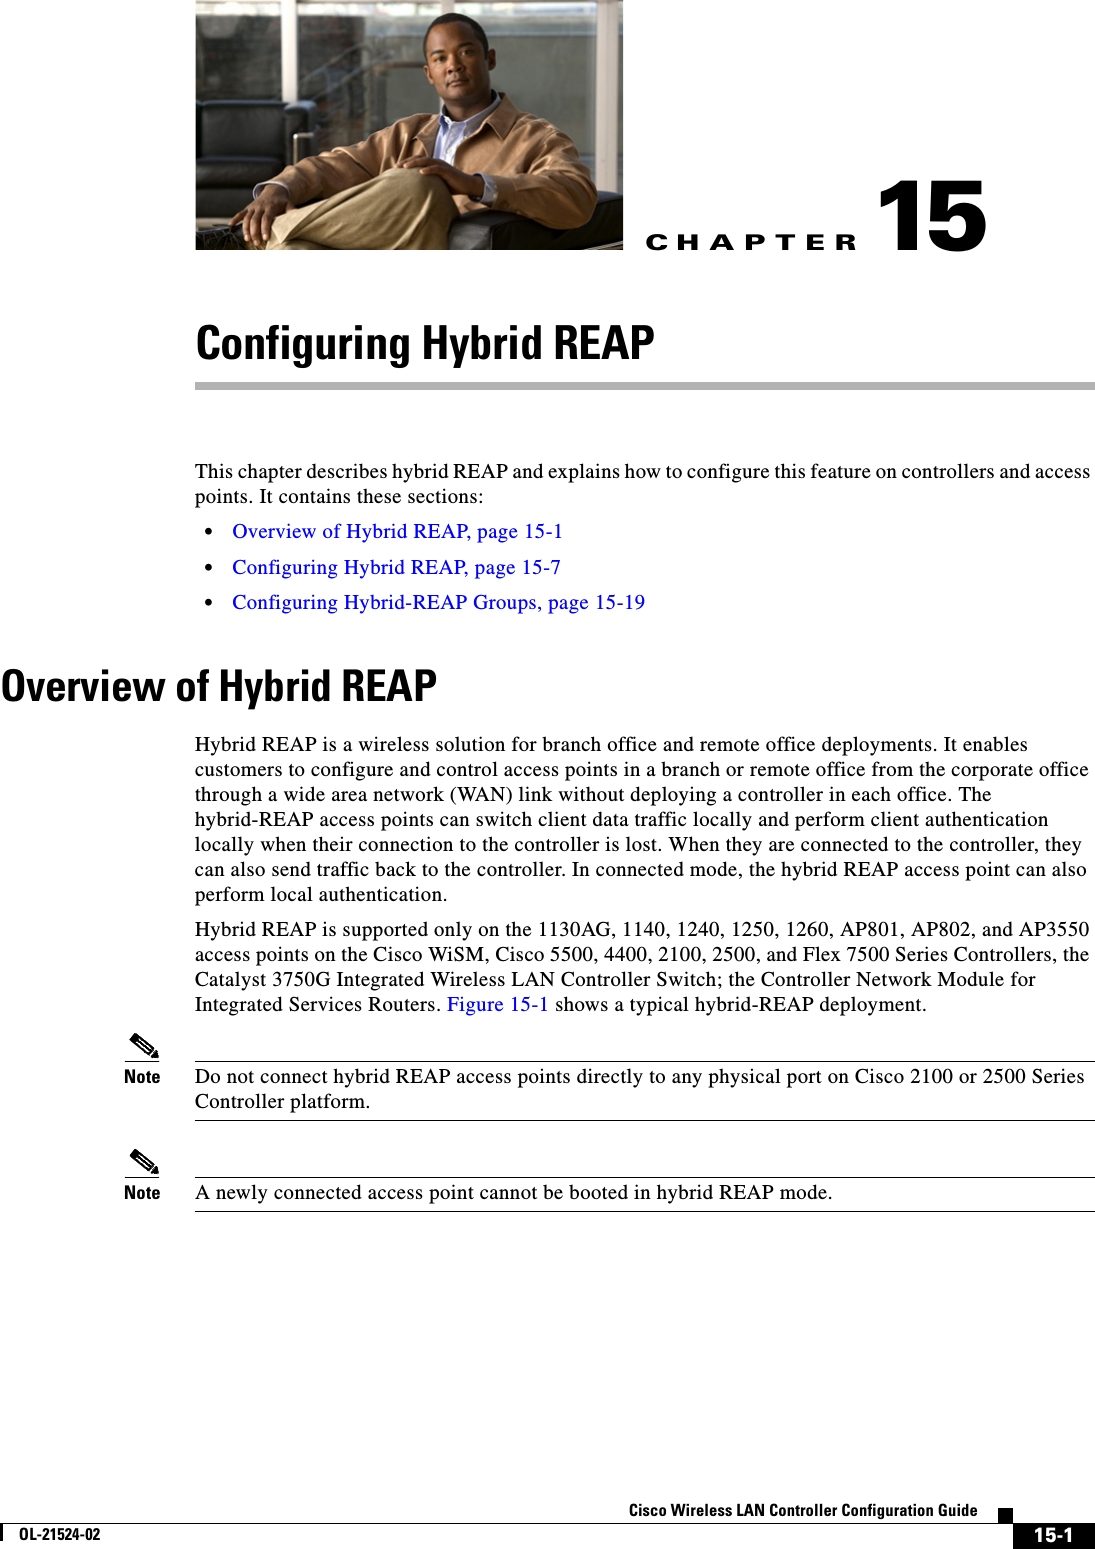 CHAPTER15-1Cisco Wireless LAN Controller Configuration GuideOL-21524-0215Configuring Hybrid REAPThis chapter describes hybrid REAP and explains how to configure this feature on controllers and access points. It contains these sections:  • Overview of Hybrid REAP, page 15-1  • Configuring Hybrid REAP, page 15-7  • Configuring Hybrid-REAP Groups, page 15-19Overview of Hybrid REAPHybrid REAP is a wireless solution for branch office and remote office deployments. It enables customers to configure and control access points in a branch or remote office from the corporate office through a wide area network (WAN) link without deploying a controller in each office. The hybrid-REAP access points can switch client data traffic locally and perform client authentication locally when their connection to the controller is lost. When they are connected to the controller, they can also send traffic back to the controller. In connected mode, the hybrid REAP access point can also perform local authentication.Hybrid REAP is supported only on the 1130AG, 1140, 1240, 1250, 1260, AP801, AP802, and AP3550 access points on the Cisco WiSM, Cisco 5500, 4400, 2100, 2500, and Flex 7500 Series Controllers, the Catalyst 3750G Integrated Wireless LAN Controller Switch; the Controller Network Module for Integrated Services Routers. Figure 15-1 shows a typical hybrid-REAP deployment.Note Do not connect hybrid REAP access points directly to any physical port on Cisco 2100 or 2500 Series Controller platform.Note A newly connected access point cannot be booted in hybrid REAP mode.